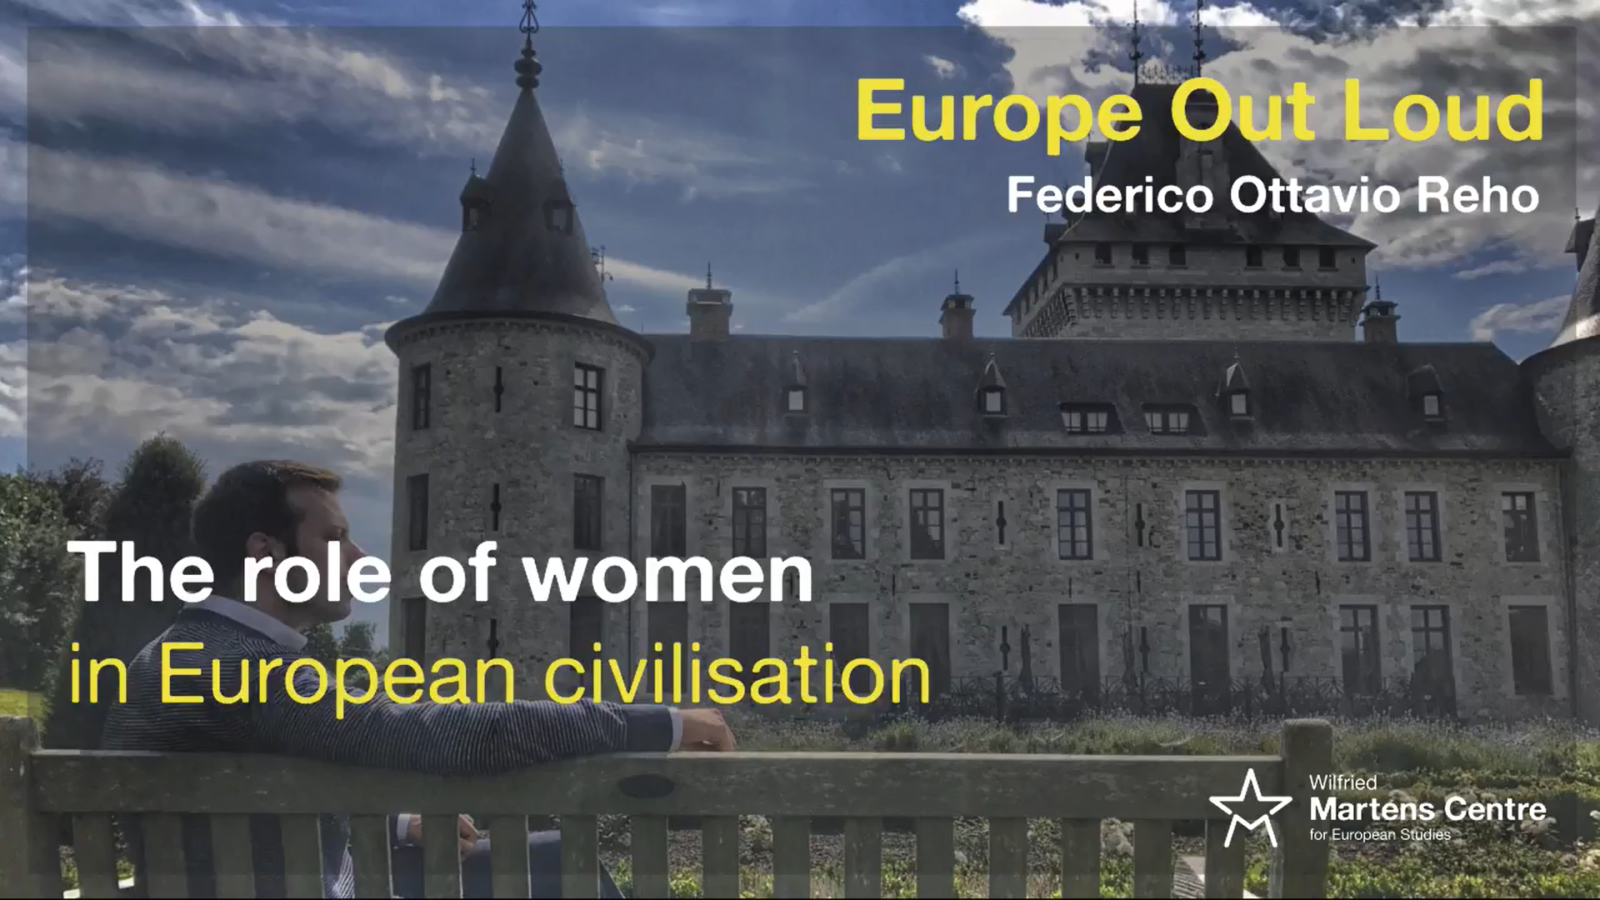 The role of women in European civilisation